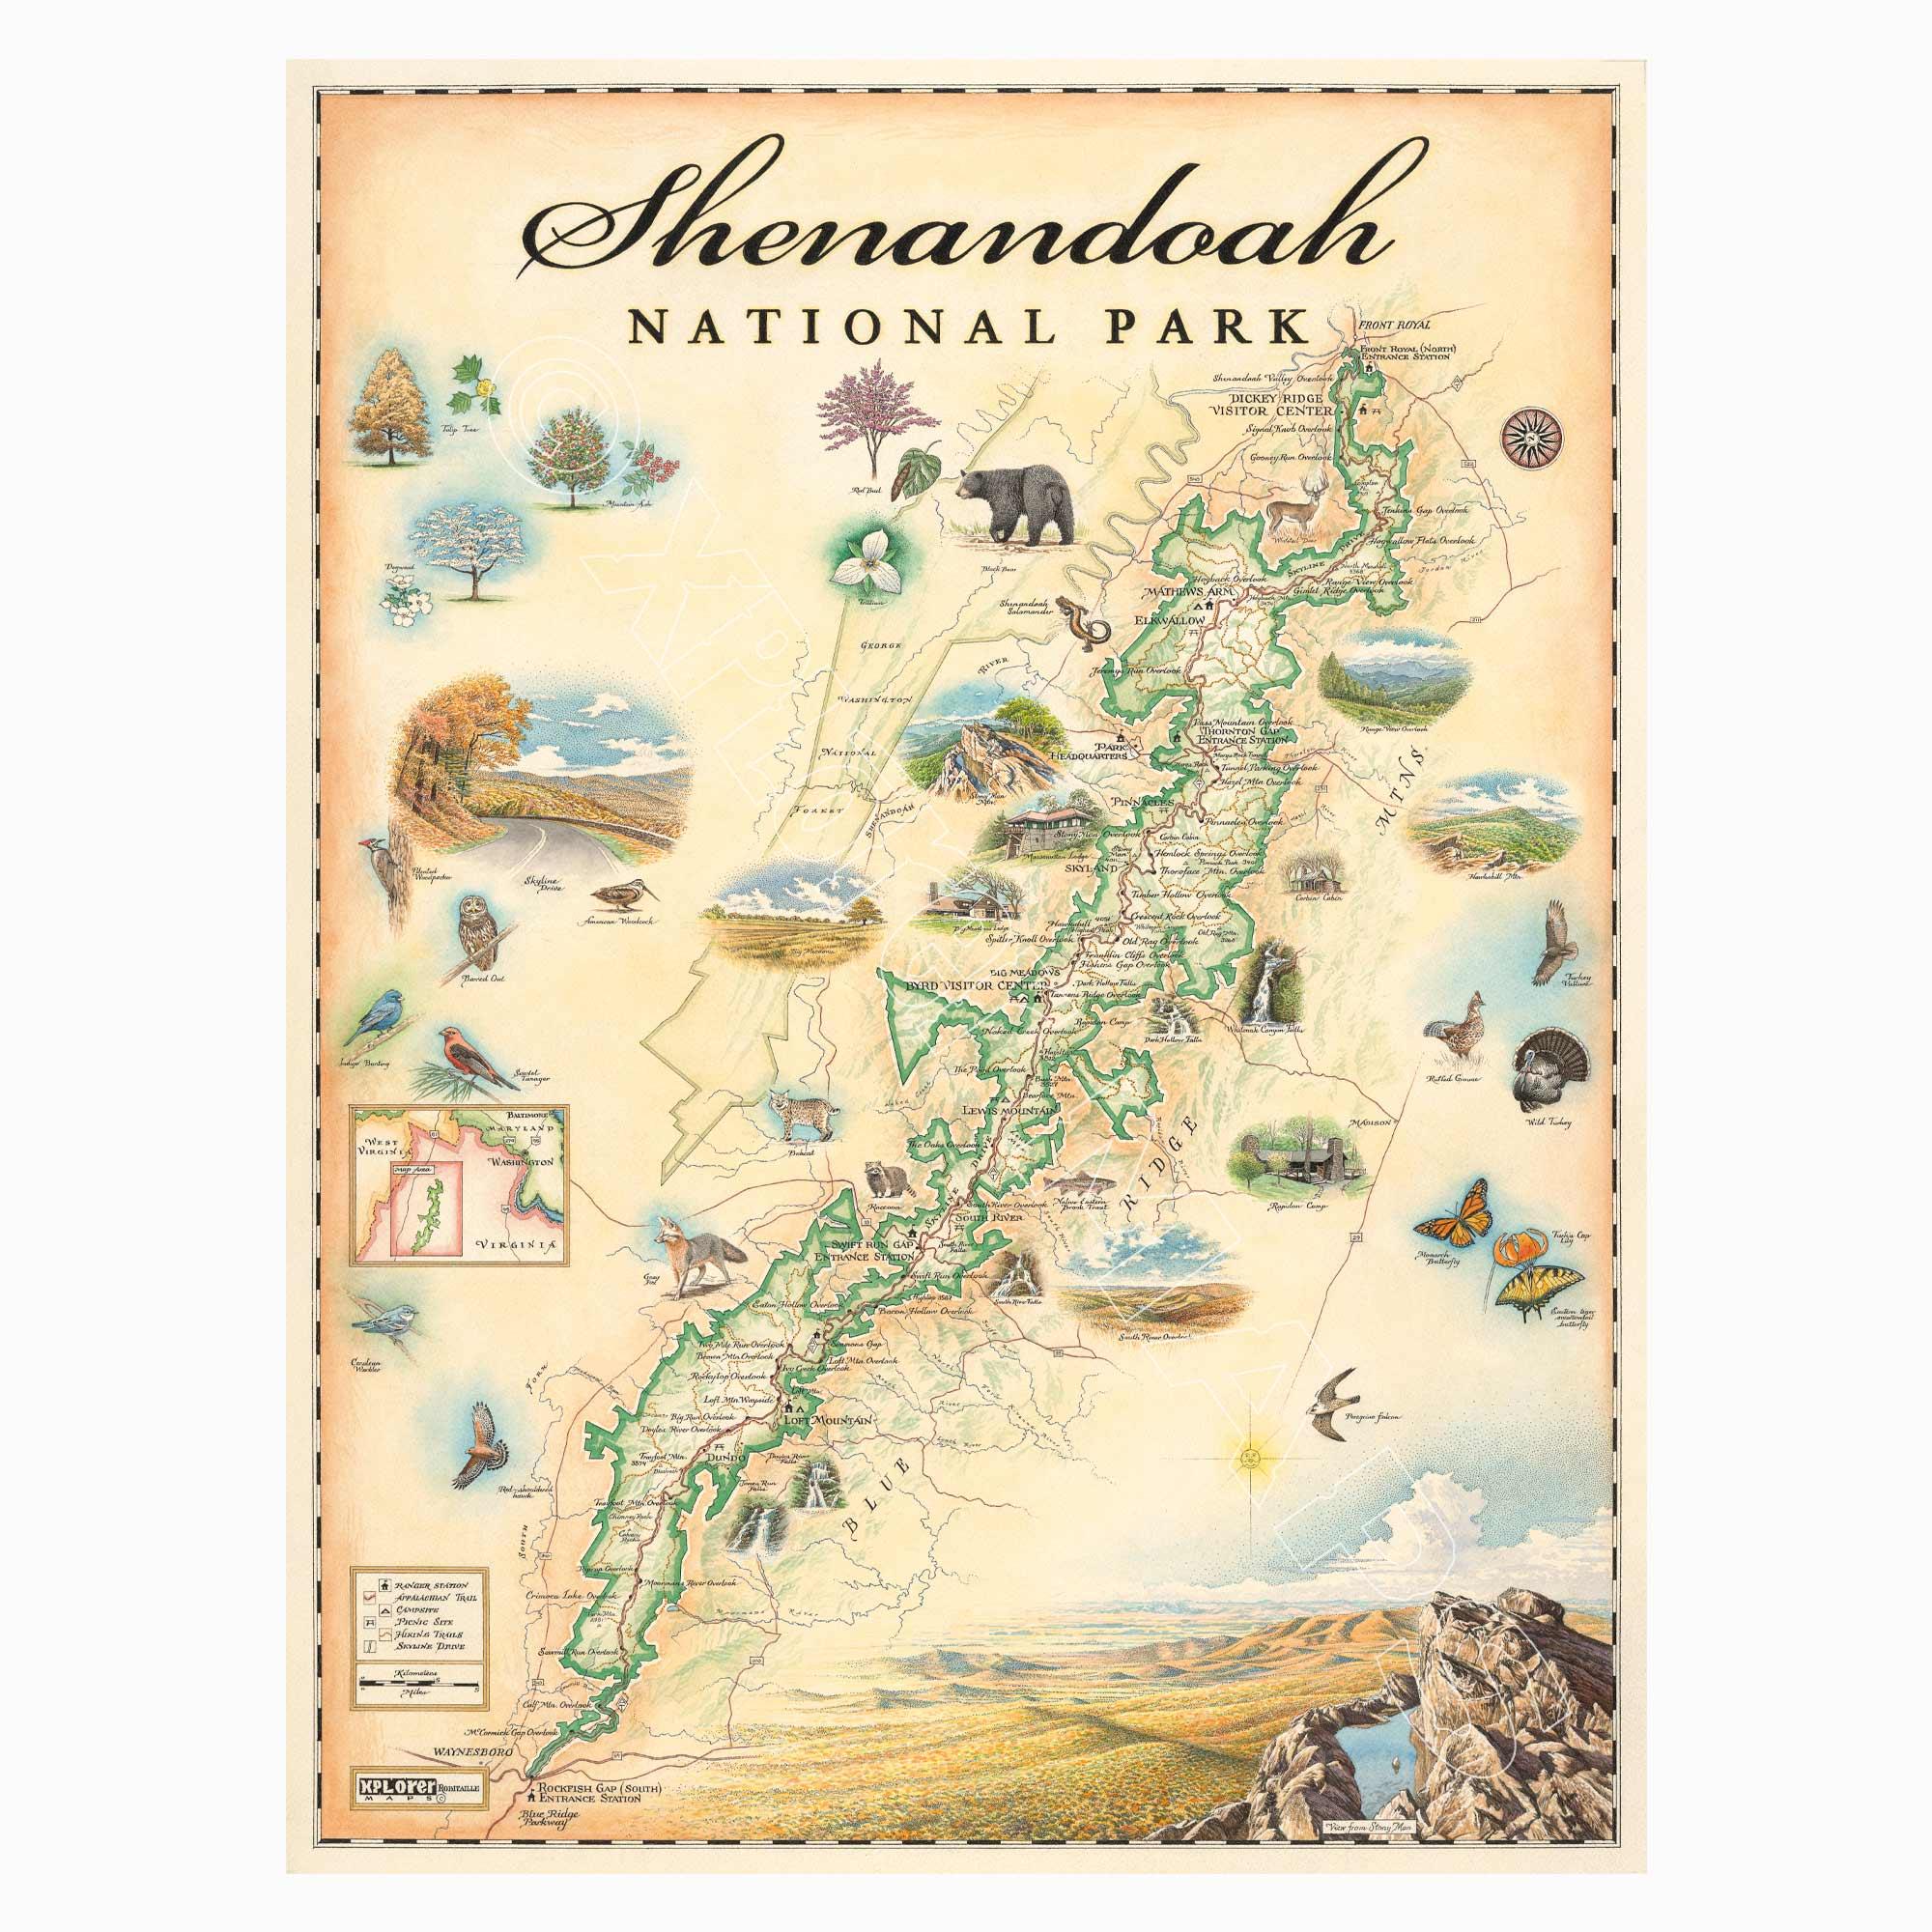 Shenandoah National Park hand-drawn map in earth tones beige and green. The map includes illustrations of places such as Skyline Drive, Byrd Visitor center, and Big Meadows Lodge. Flora and fauna include bobcat, wild turkey, trillium flowers, and a dogwood tree. Measures 18x24.